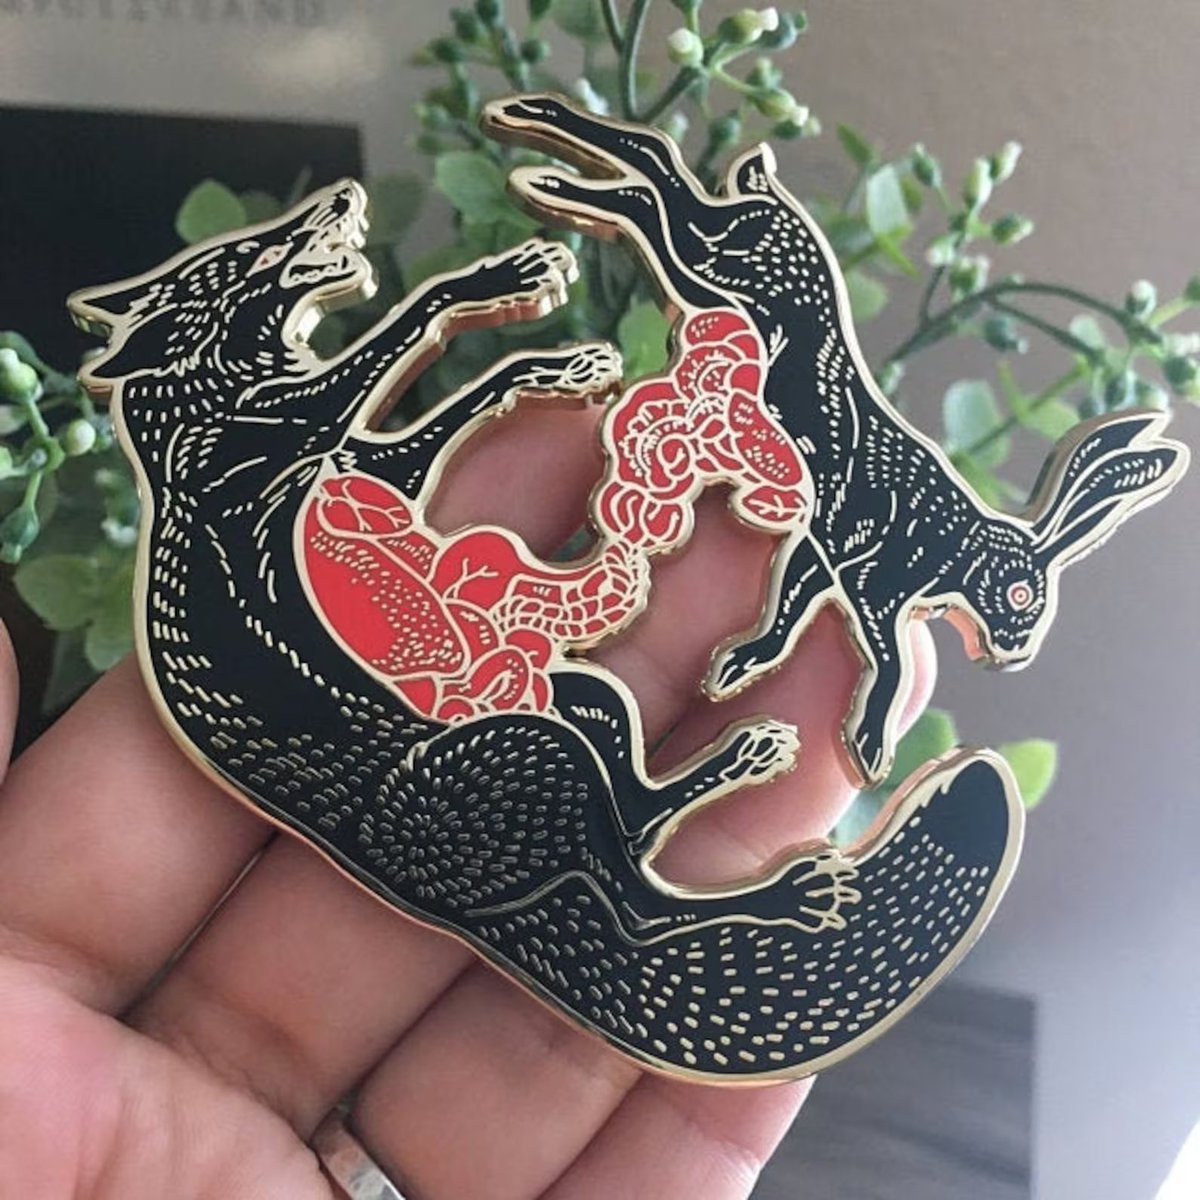 「A couple of pins that I still have avail」|💀🐺🌱ArtofMaquenda🍄👹🩸のイラスト